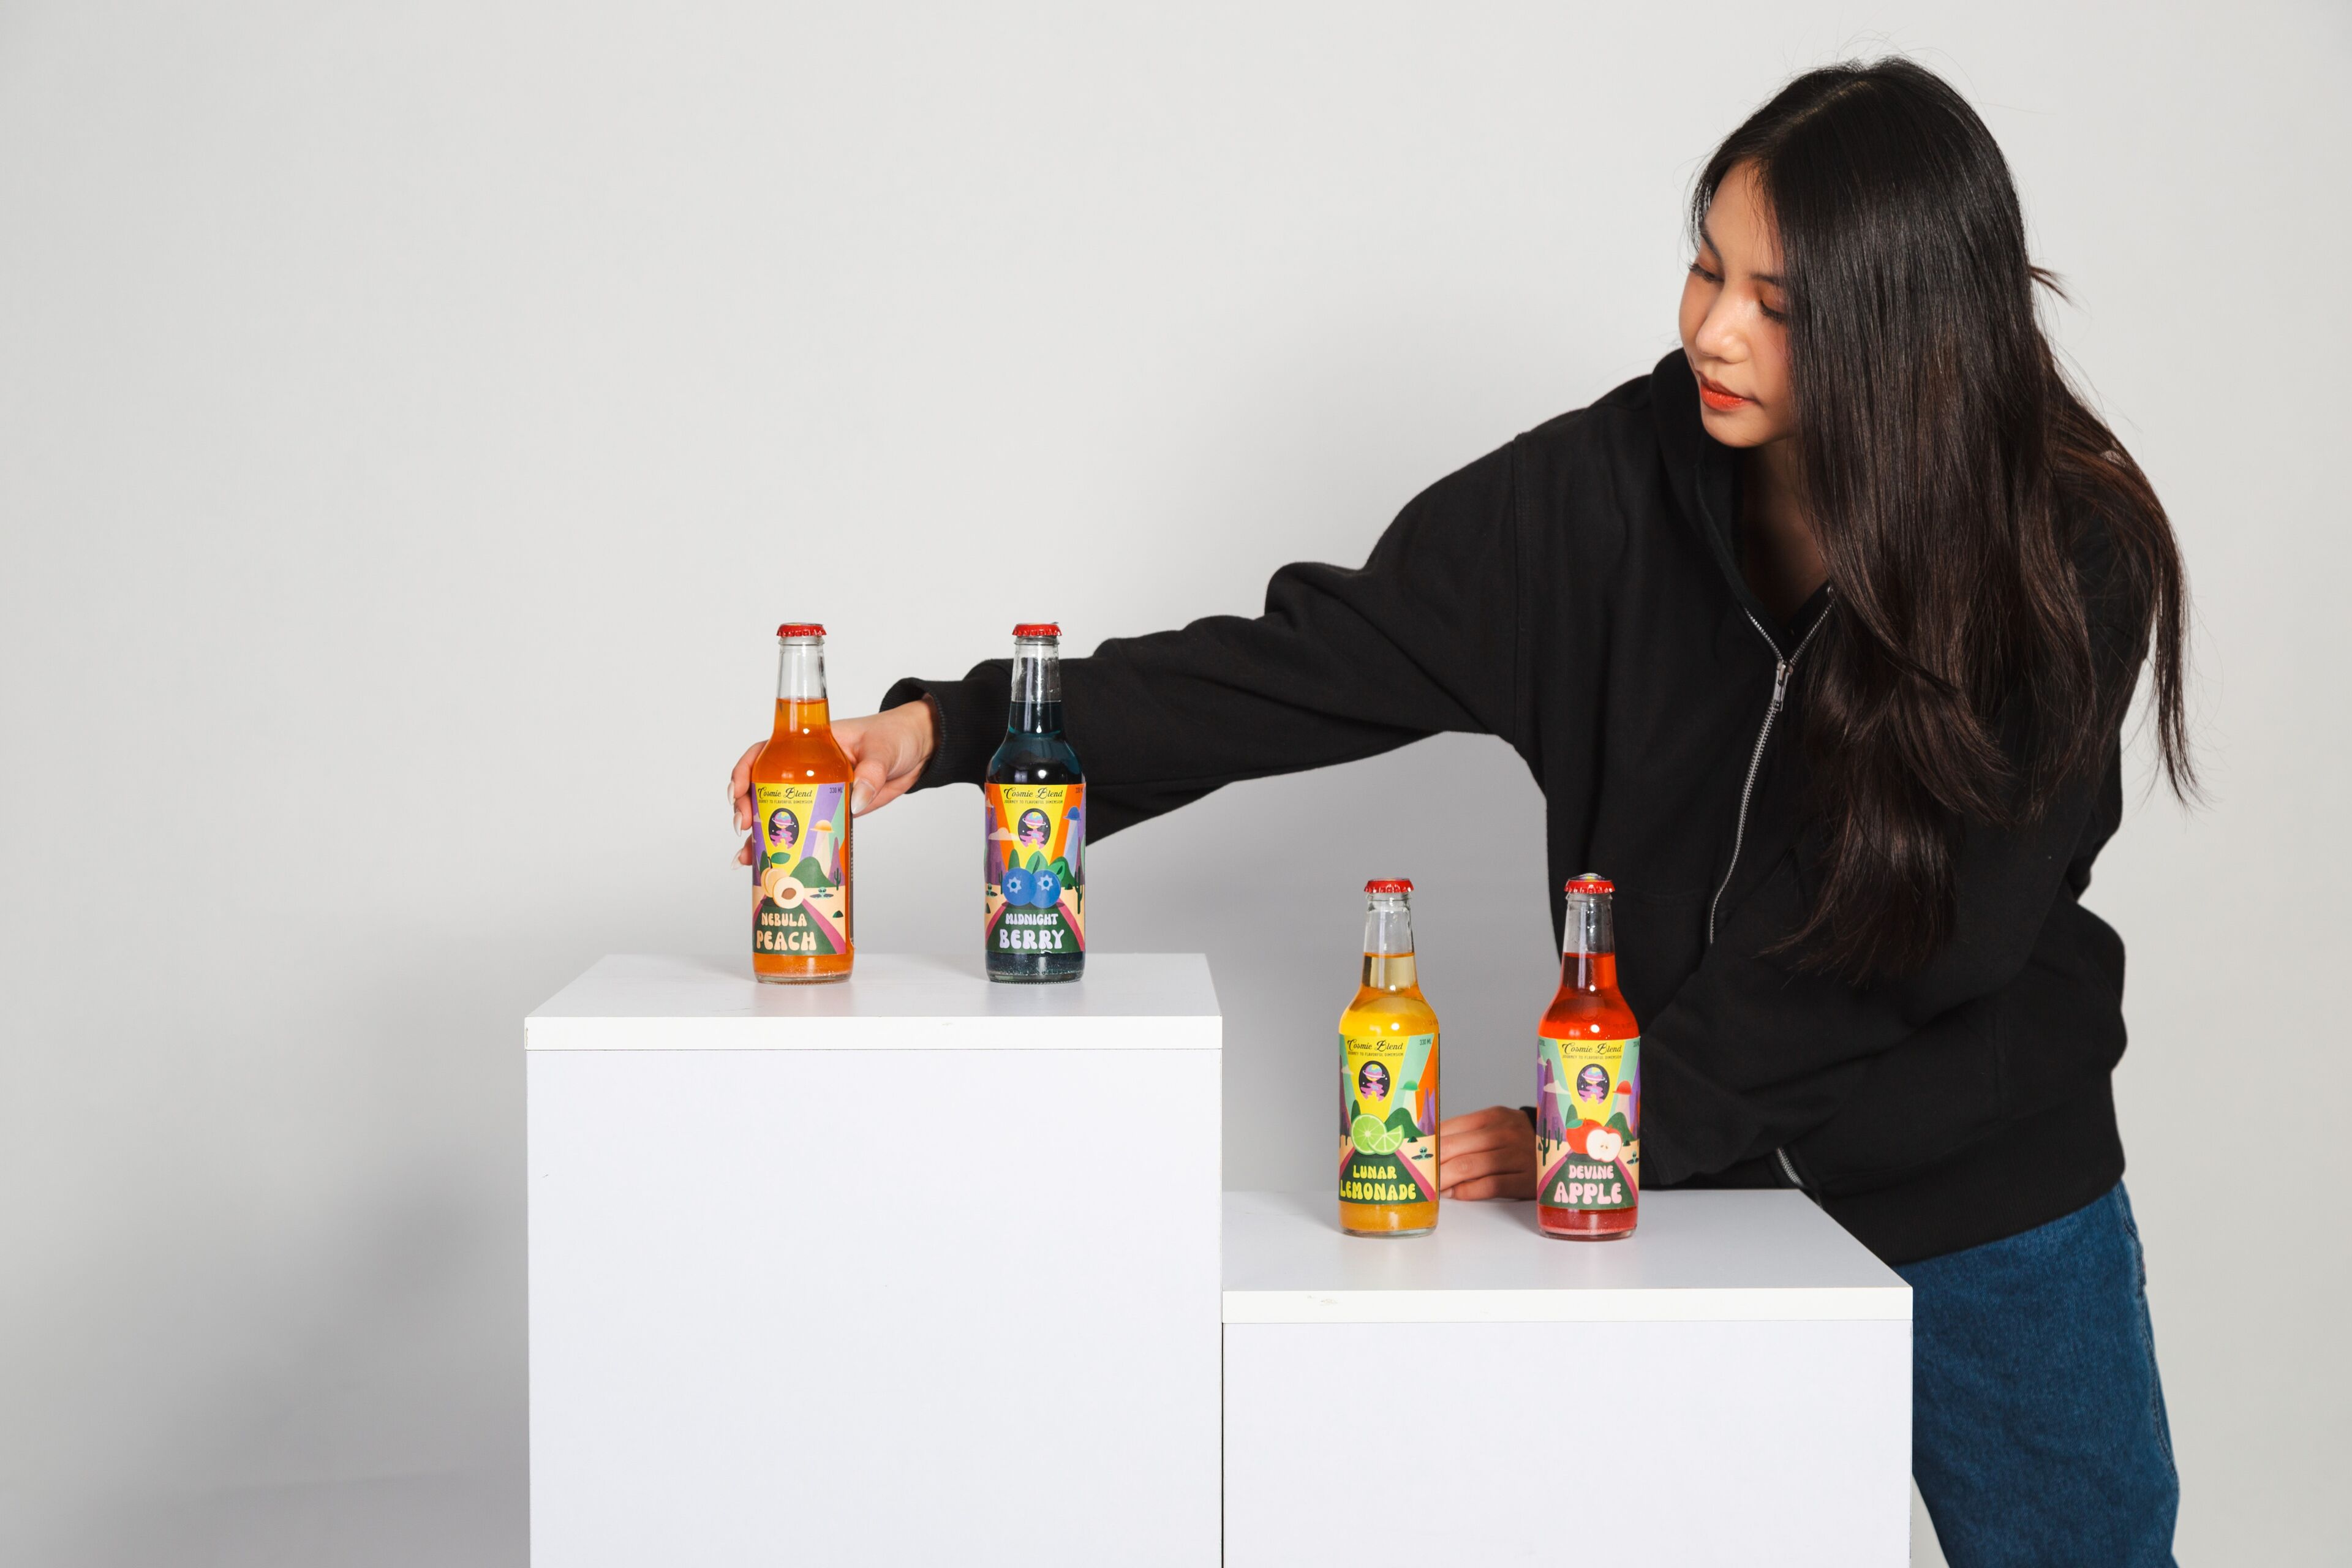 A young woman in casual attire arranges bottles with vibrant label designs, demonstrating her graphic design skills on a white display.